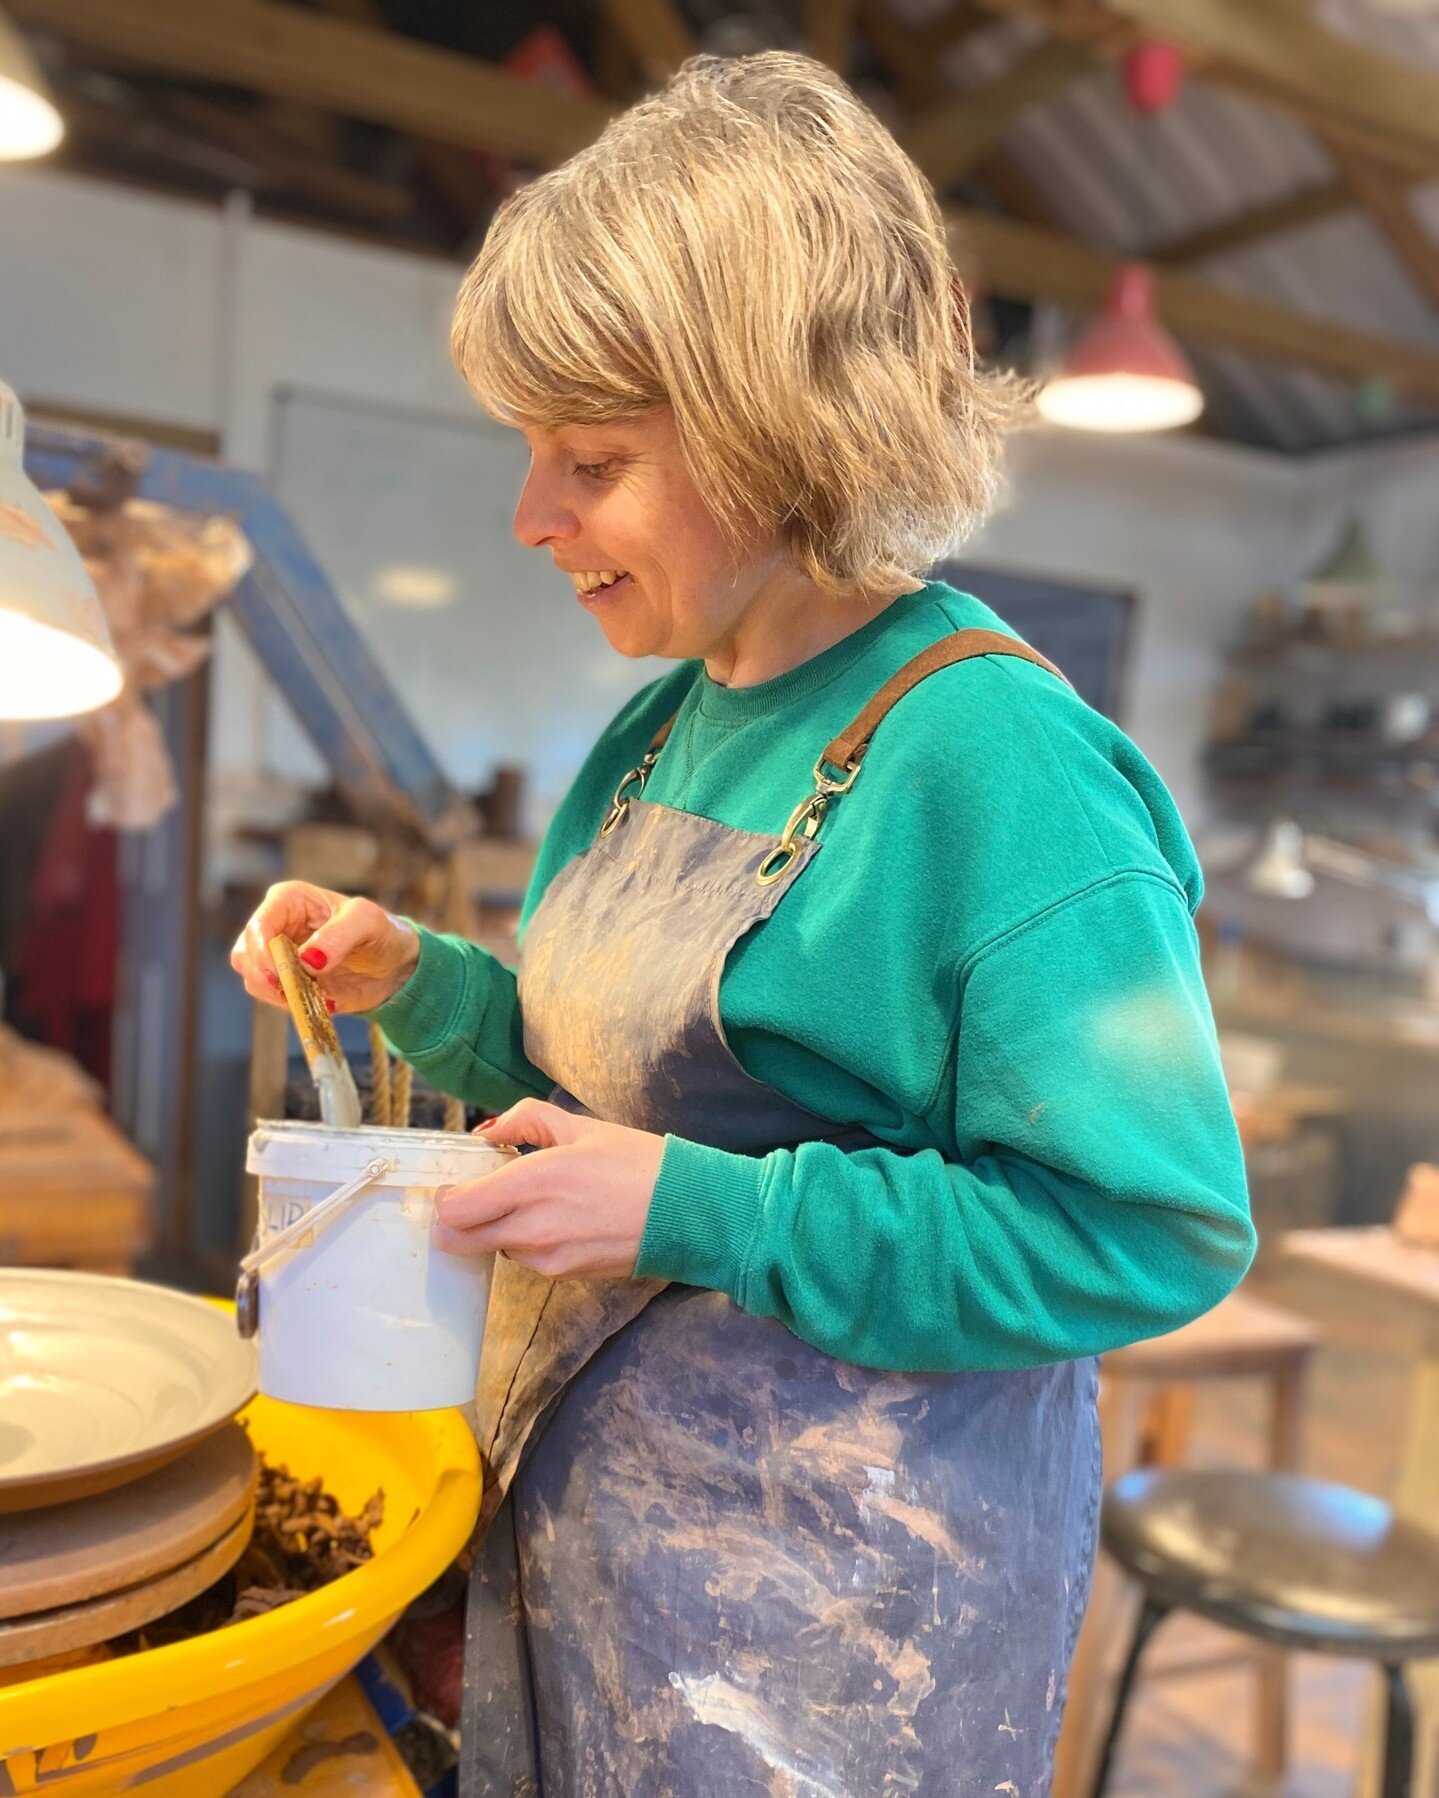 meet the team 👋

Liz O&rsquo;Dwyer - Tutor 

Liz graduated from Kent Institute of Art and Design with a BA (Hons) in Fine Art Sculpture in 2000. Following this, she studied a PGCE and has been teaching fine art and ceramics to children aged 3 to 18 